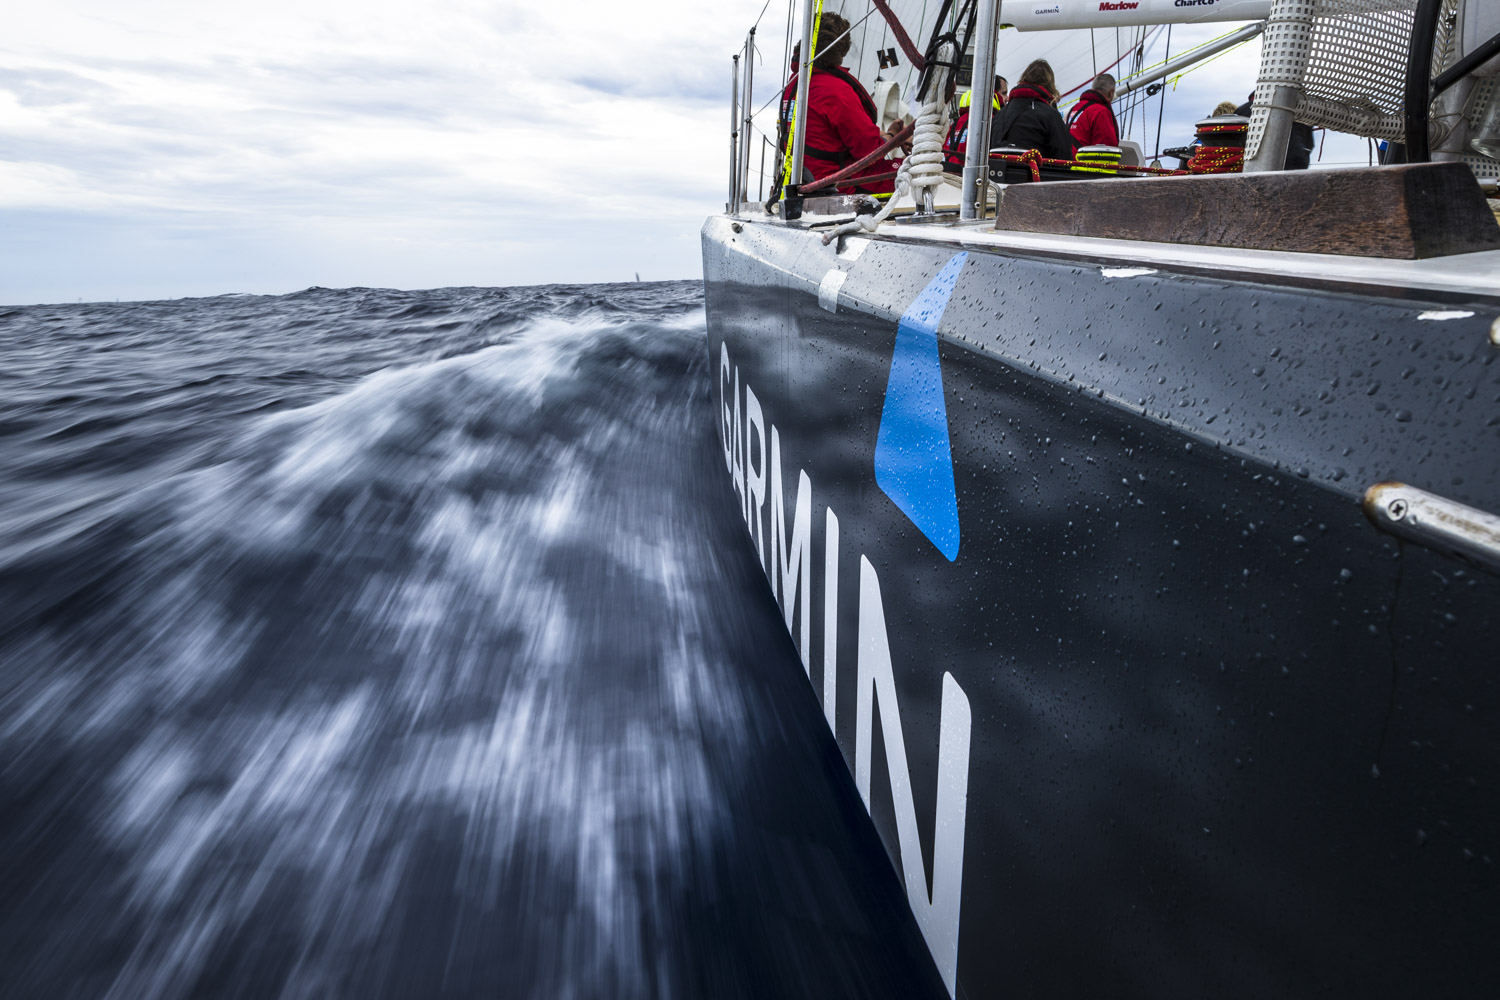 The hull of the Garmin boat shown whipping through the water 